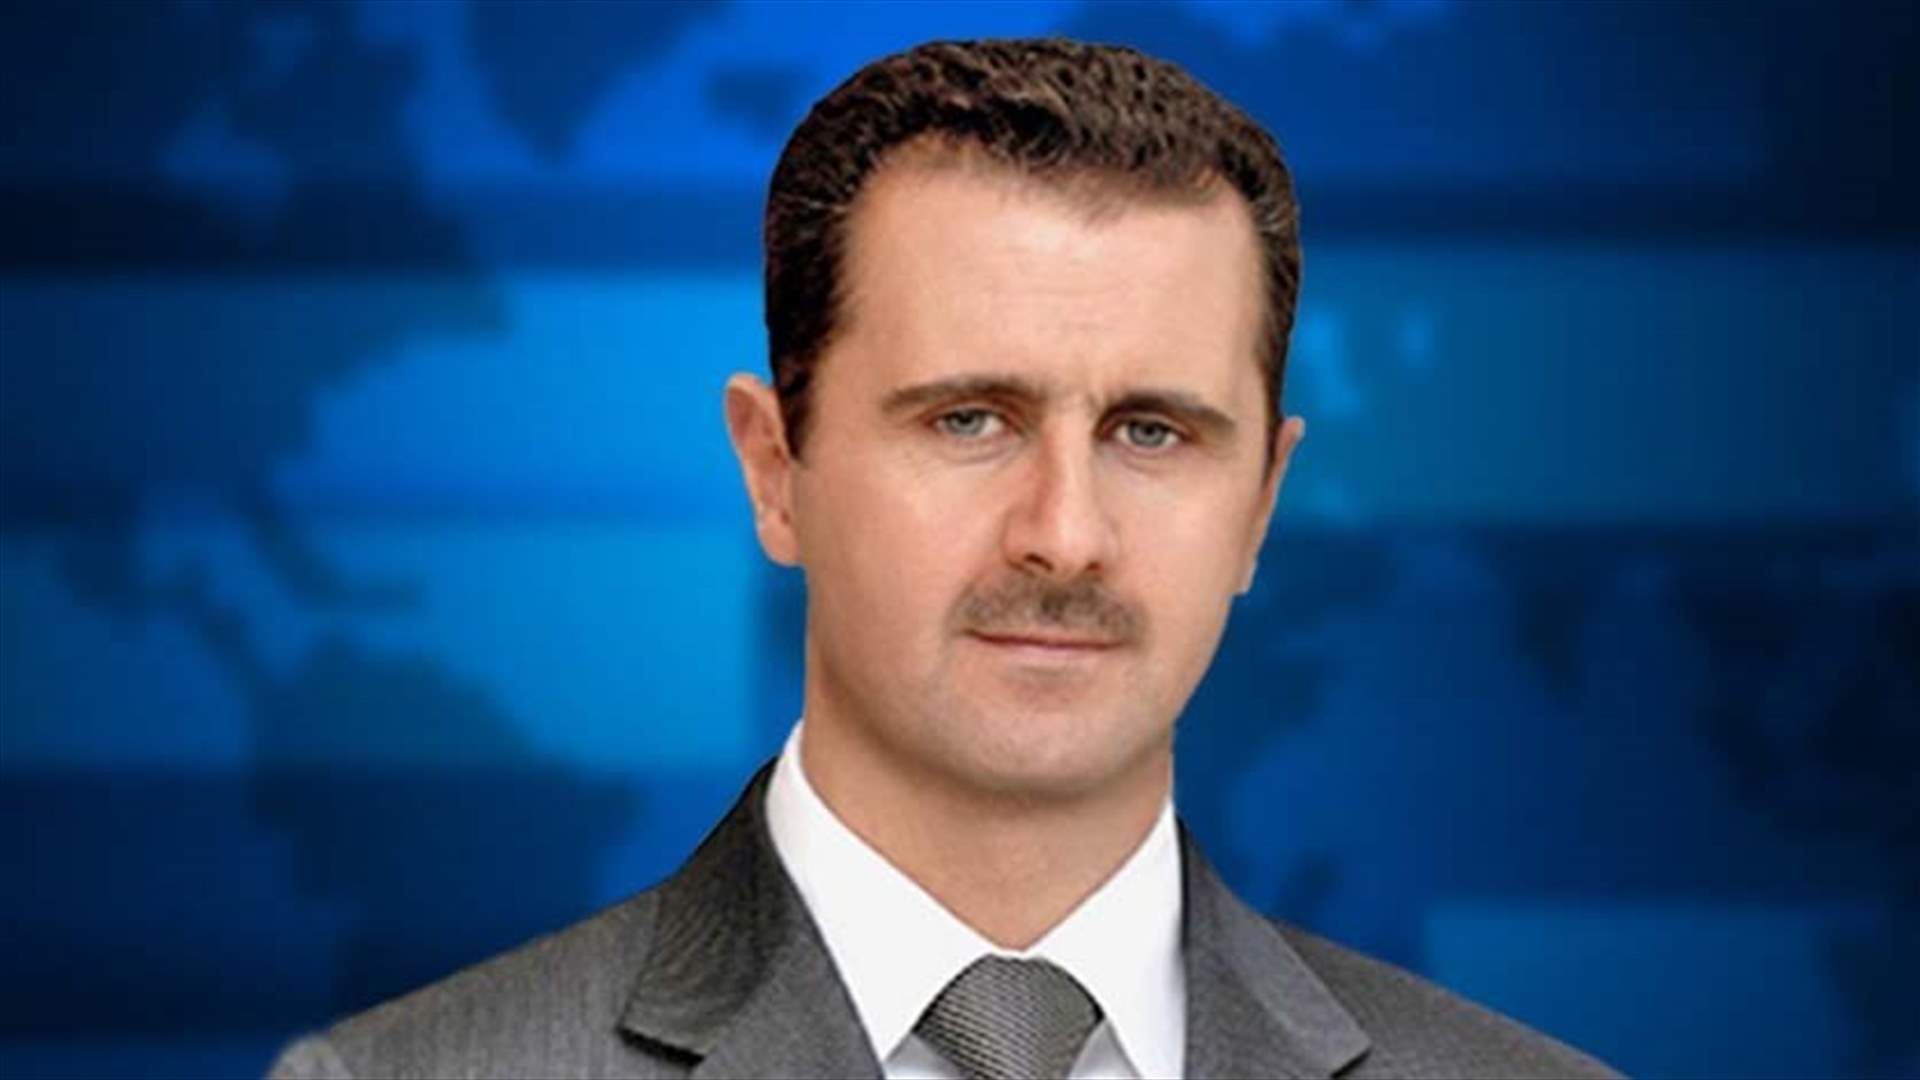 Syria truce under strain; Assad ready to discuss &quot;everything&quot; at talks